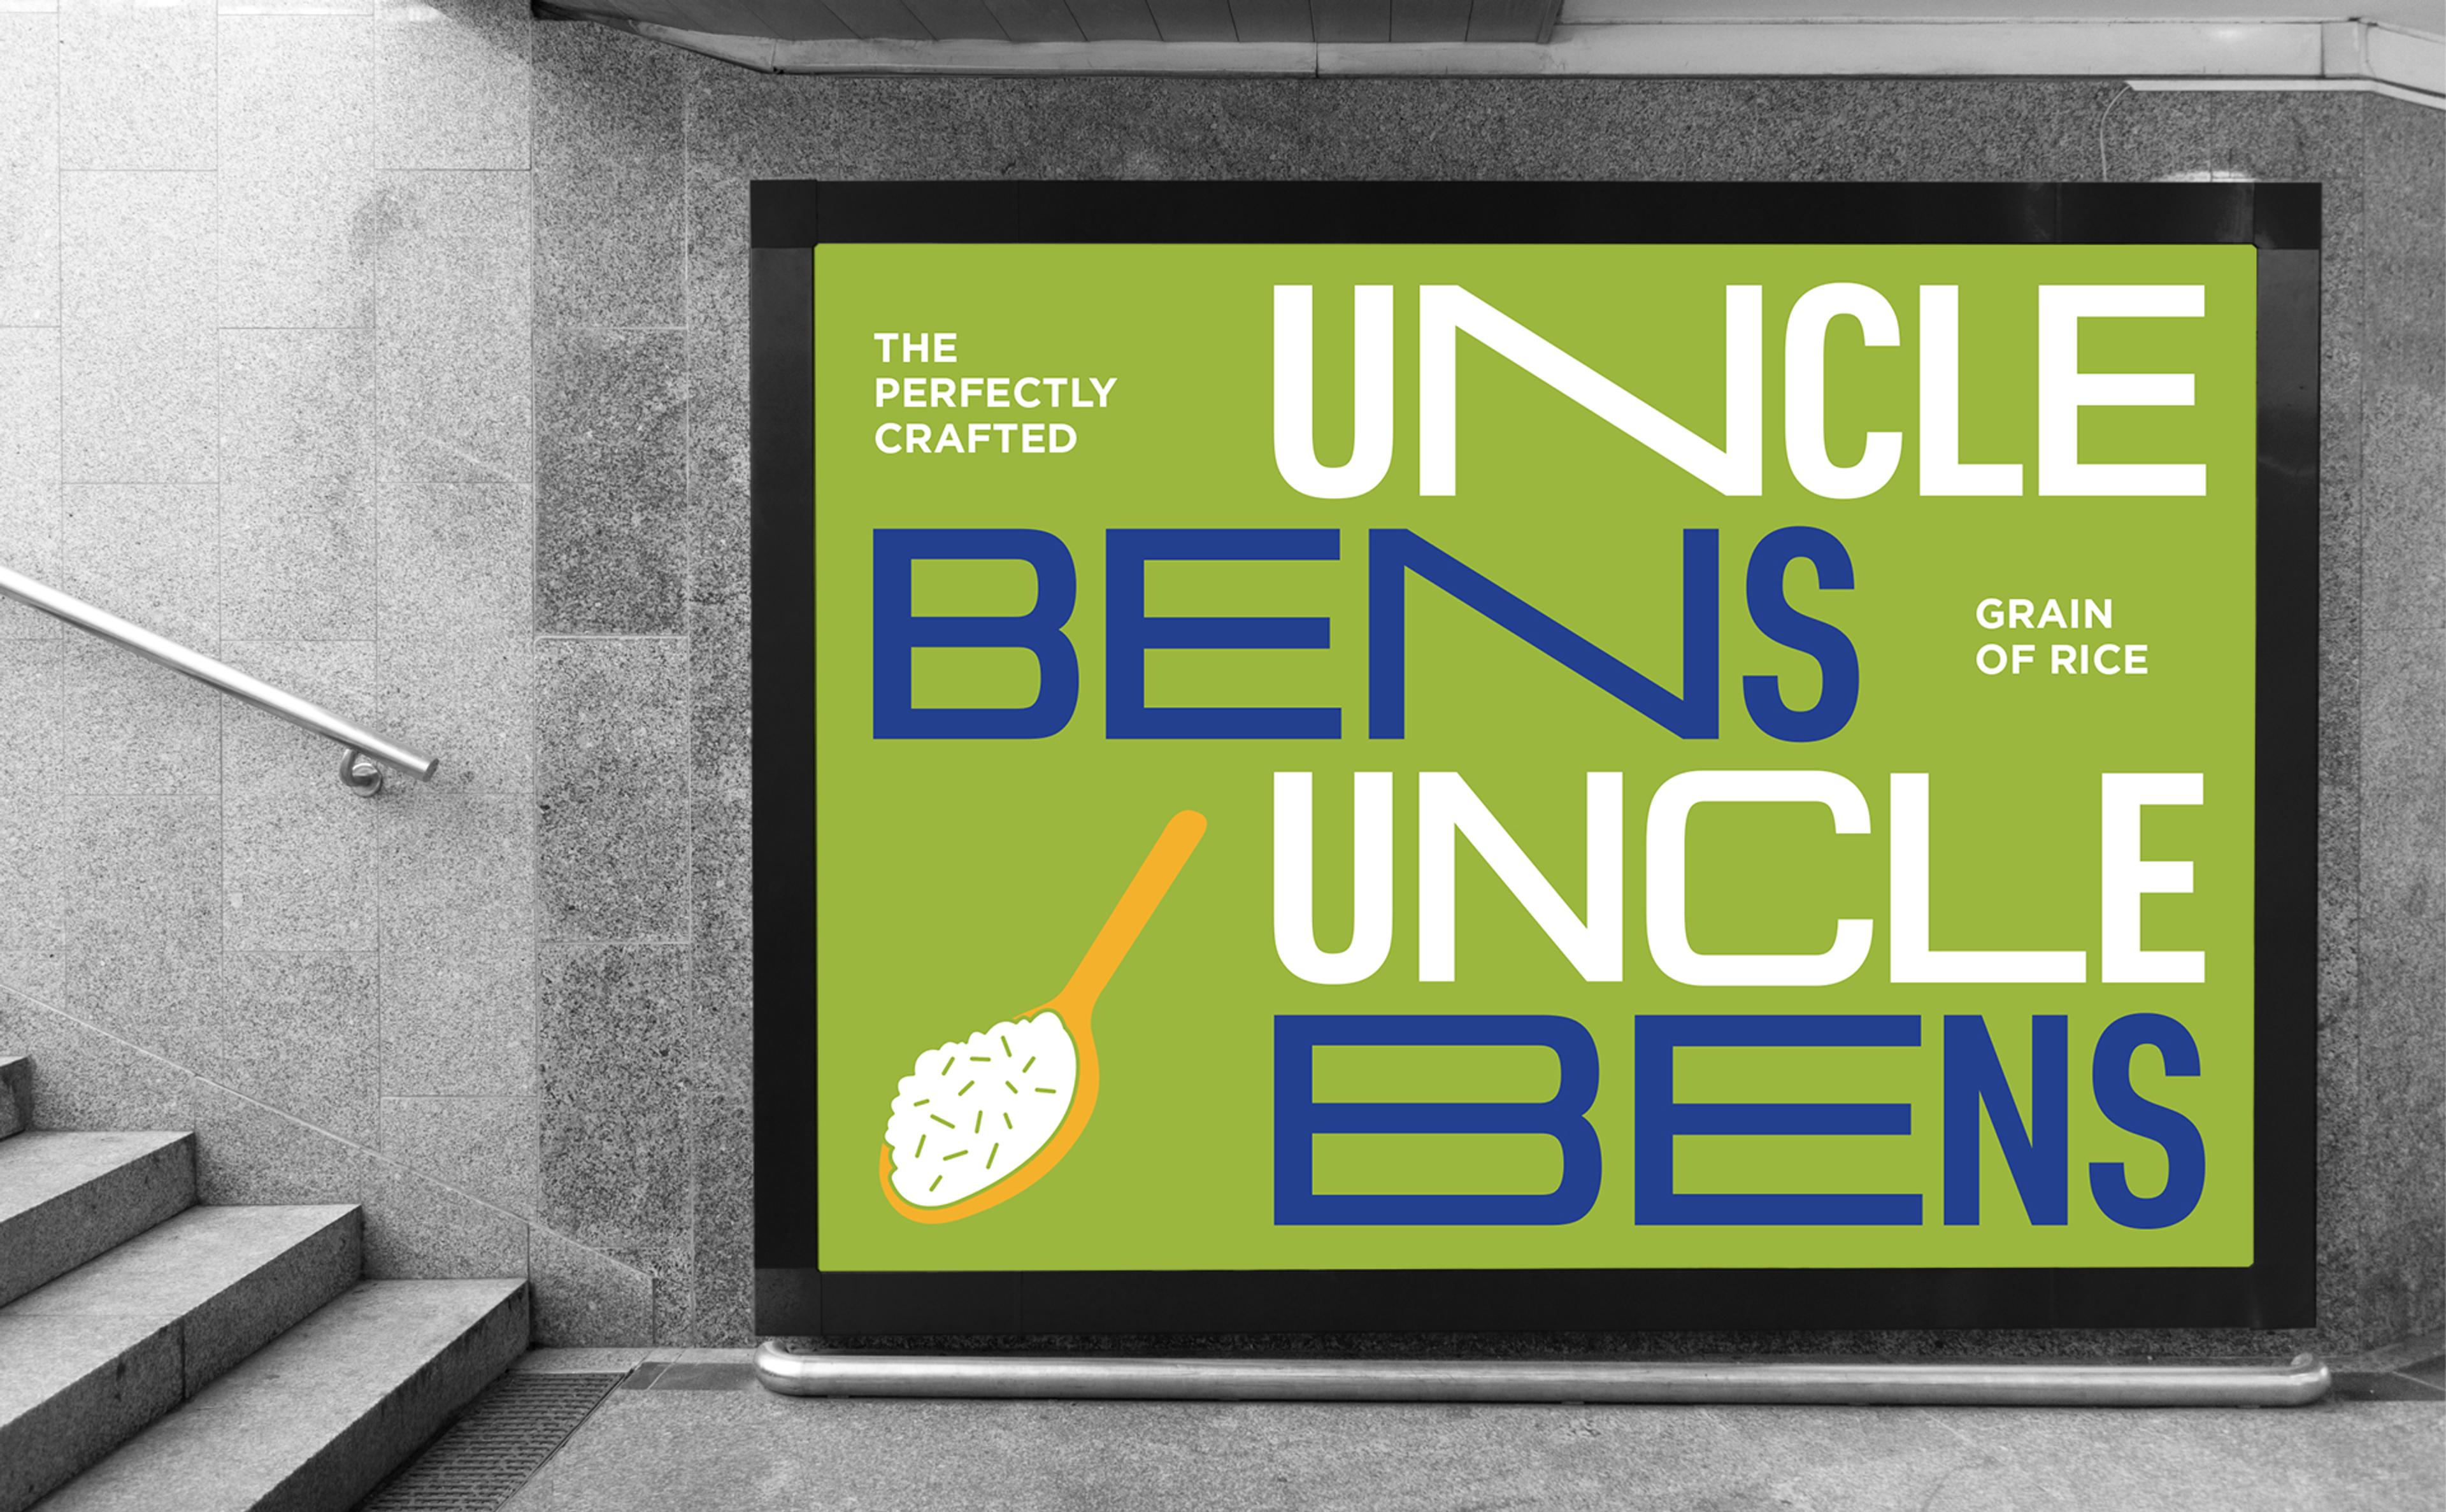 Uncle Ben's logo and illustrations on a green horizontal street advertisement